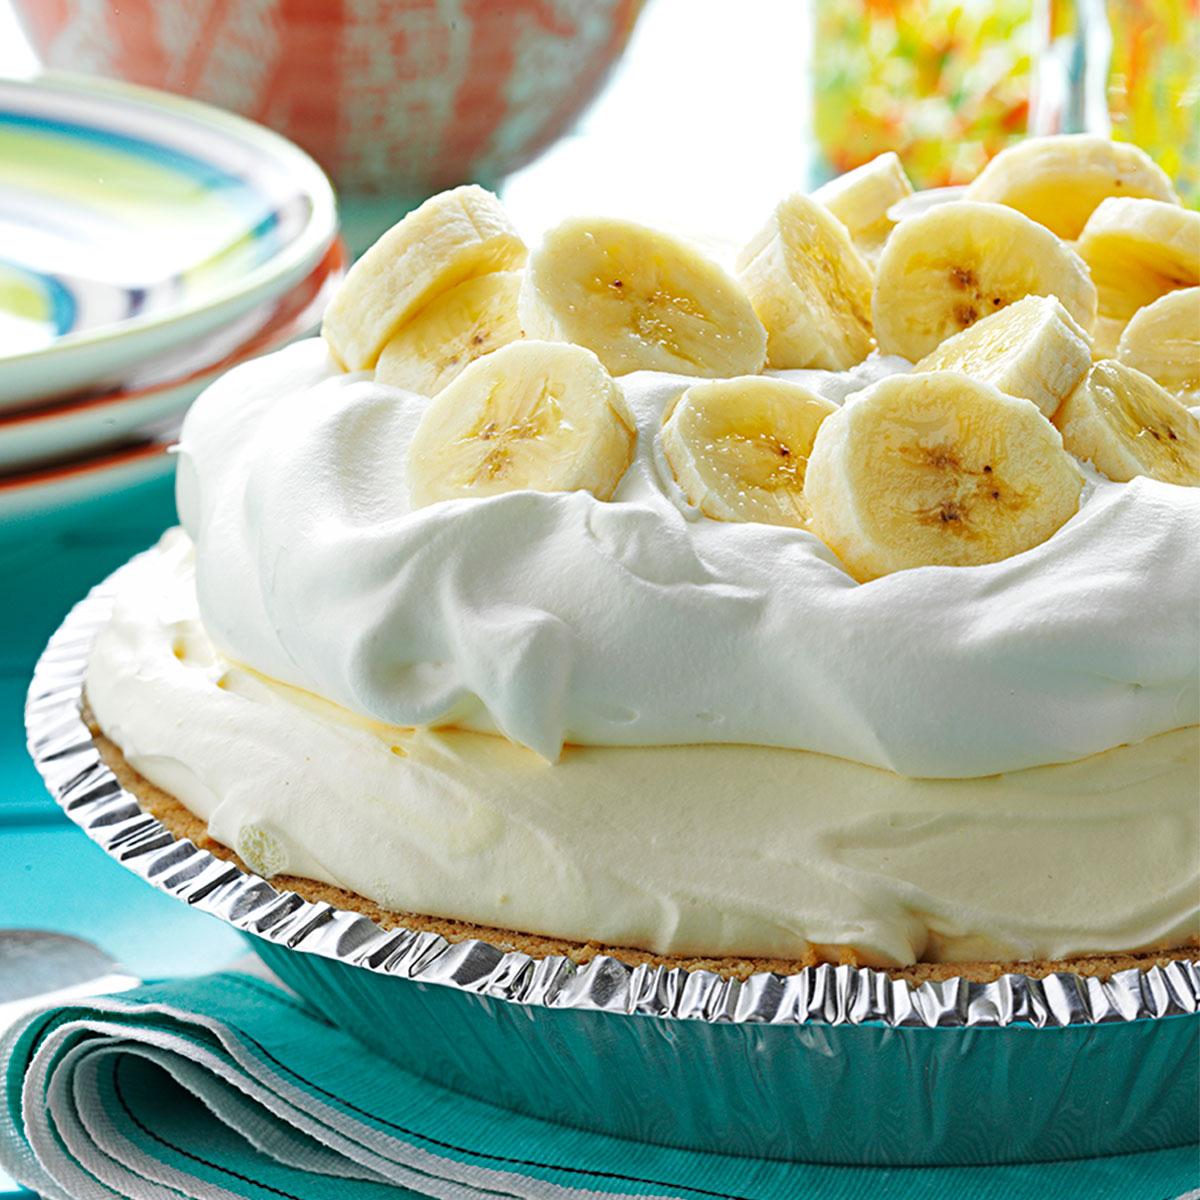 Banana Cream Pie Recipe With Cook And Serve Pudding ...